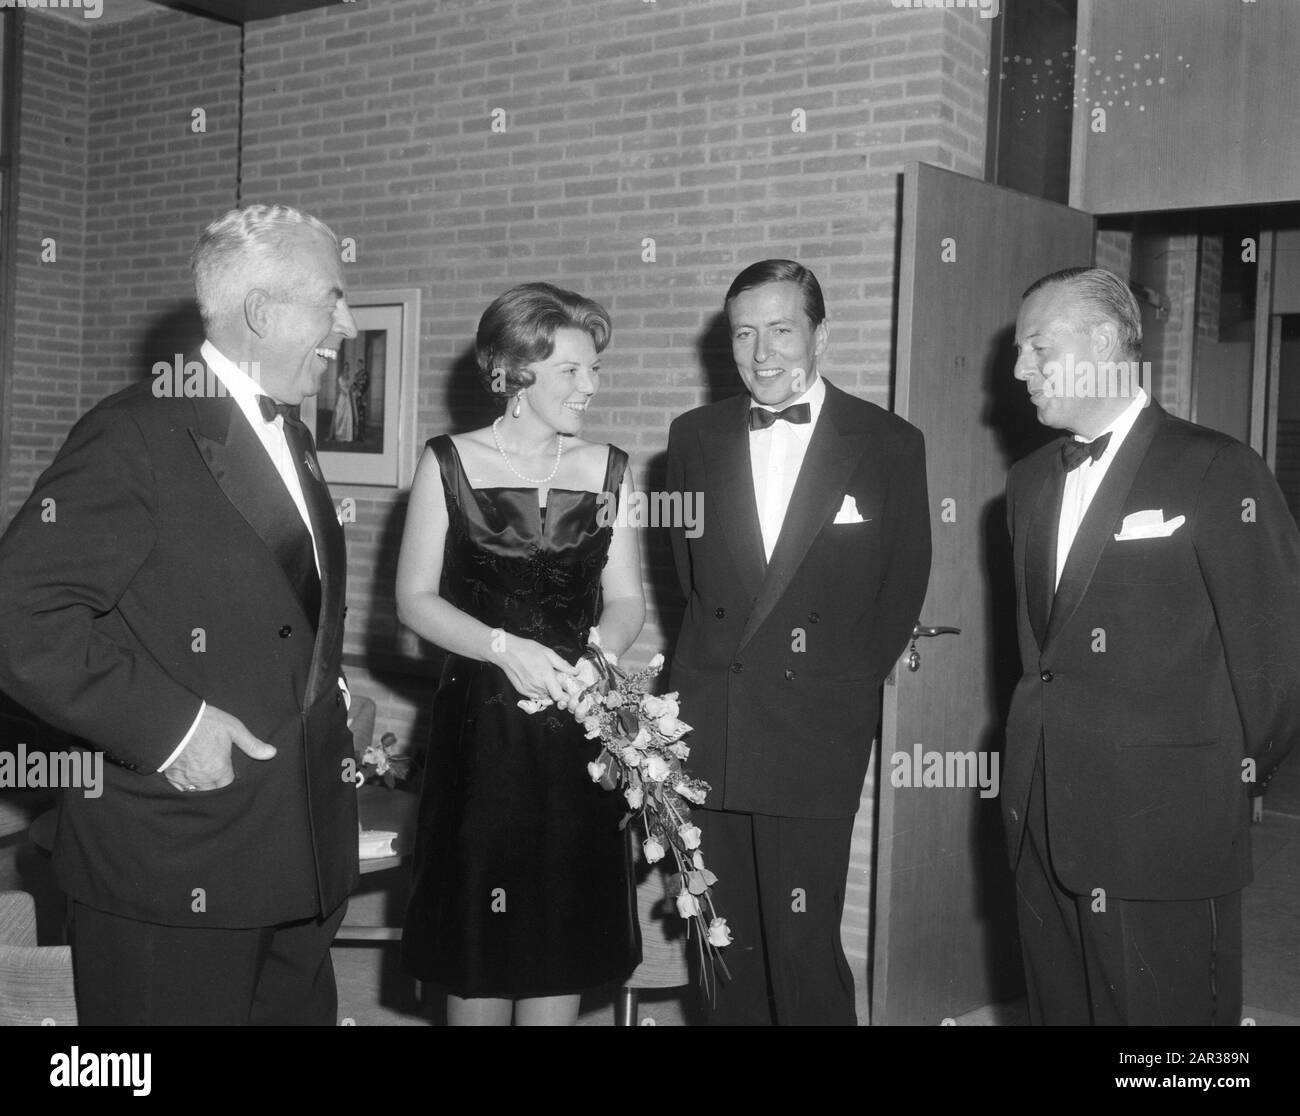 Princess Beatrix and her fiancée Claus von Amsberg at premiere of the film Tokyo Olympiad in Amsterdam  documentaries, princesses, premieres, film, Beatrix, princess, Claus, prince Annotation: Documentary film directed by Kon Ichikawa about the 1964 Summer Olympics in Tokyo Date: 15 October 1965 Location: Amsterdam, Noord-Holland Keywords: documentaries, film, premieres, princesses Personal name: Beatrix, princess, Claus, prince Stock Photo